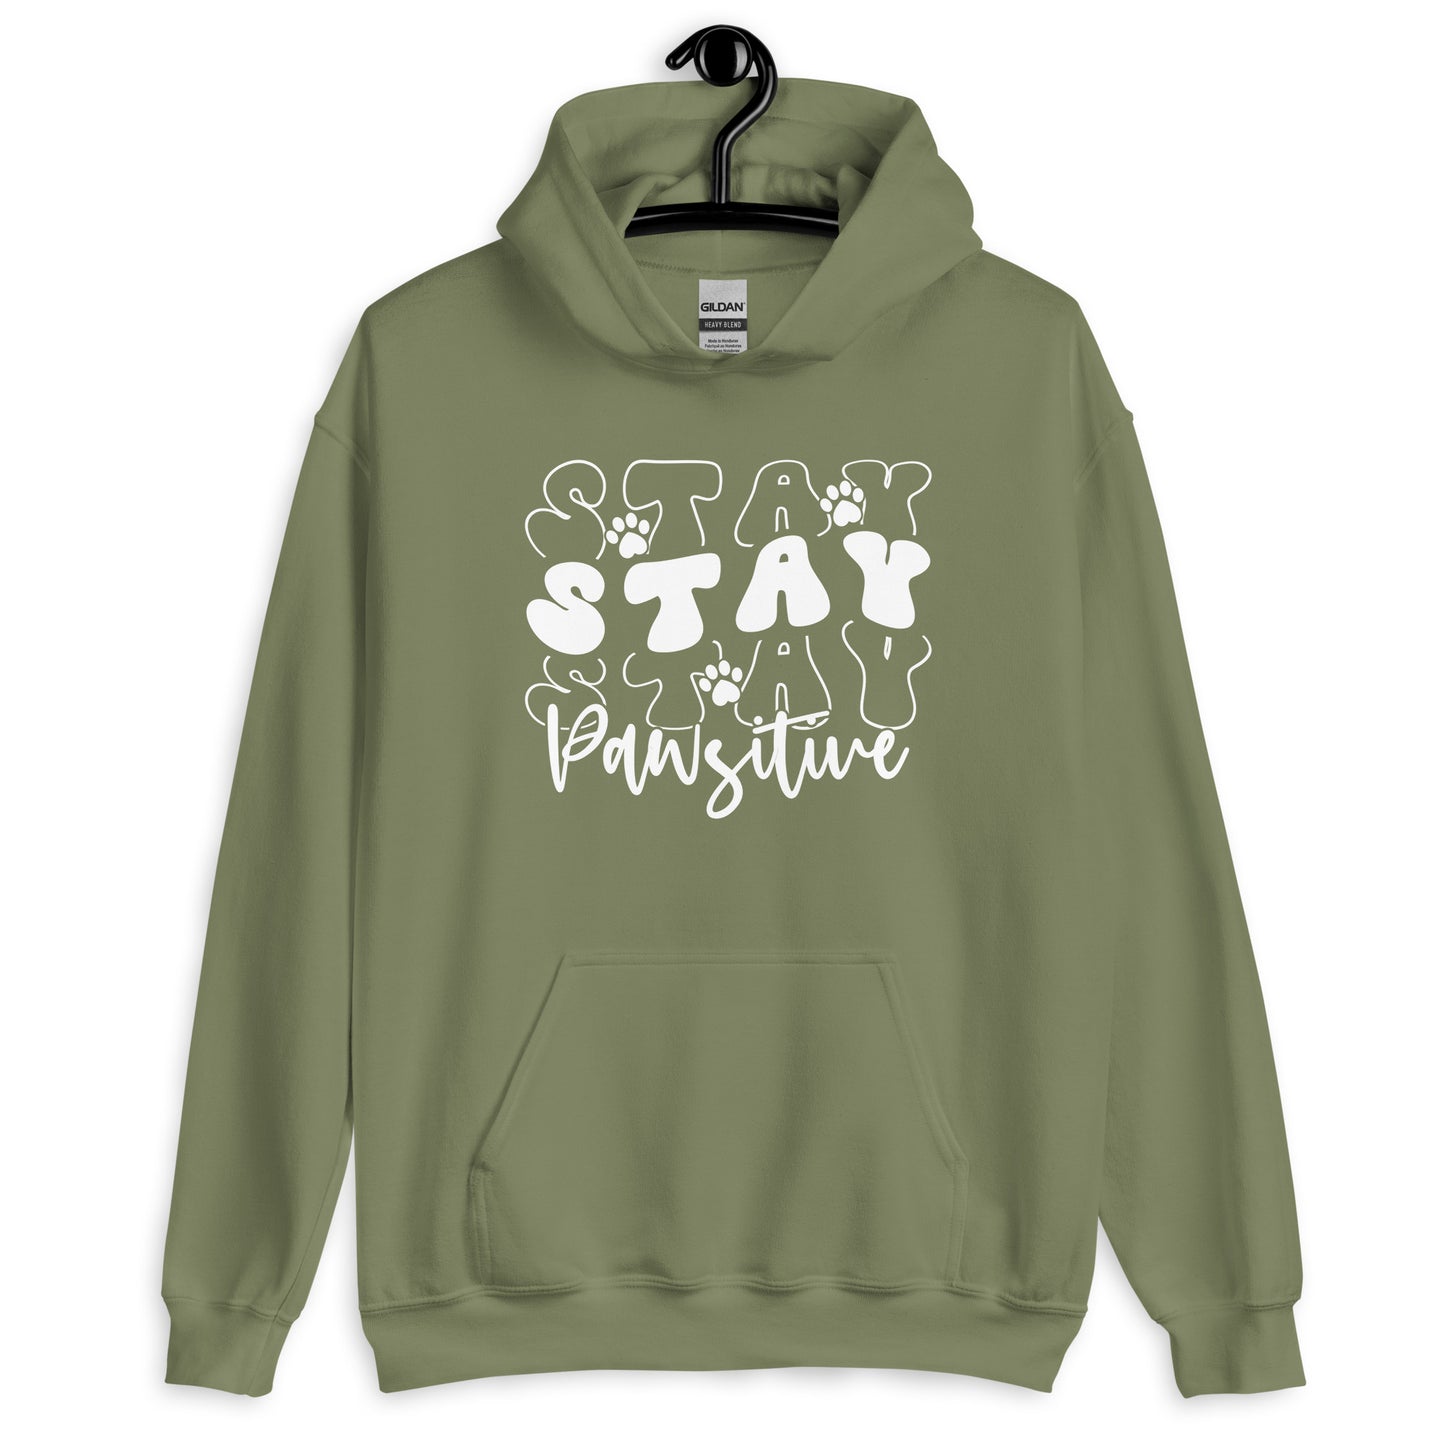 Stay Stay Stay Pawsitive Hoodie